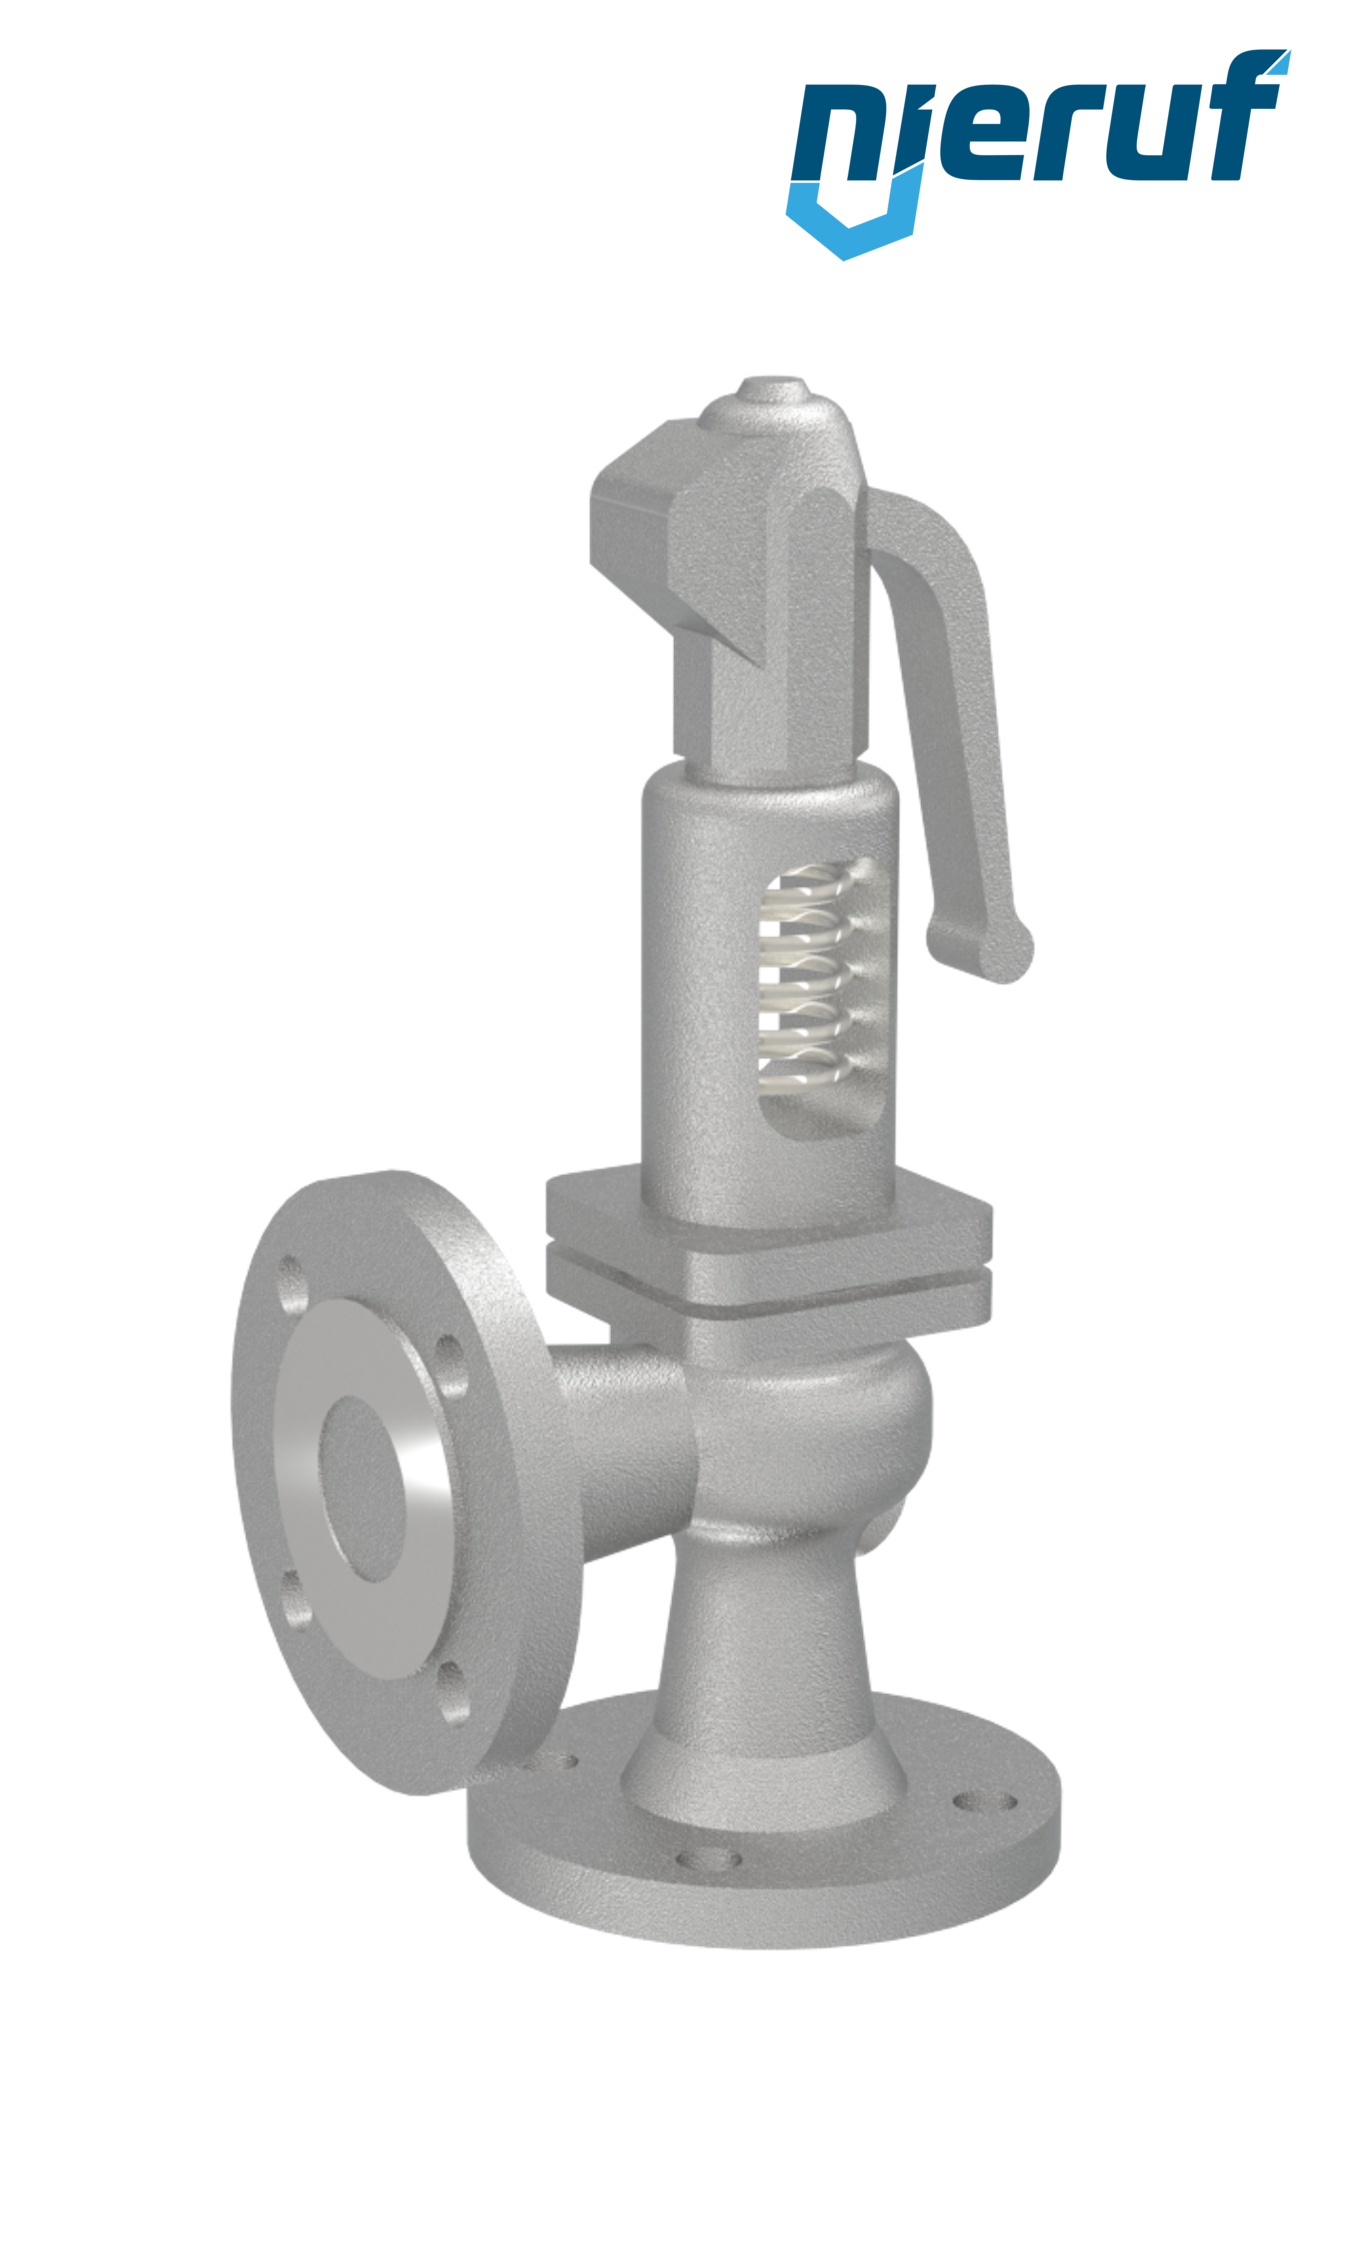 flange-safety valve DN25/DN25 SF0202, cast steel FPM, with lever